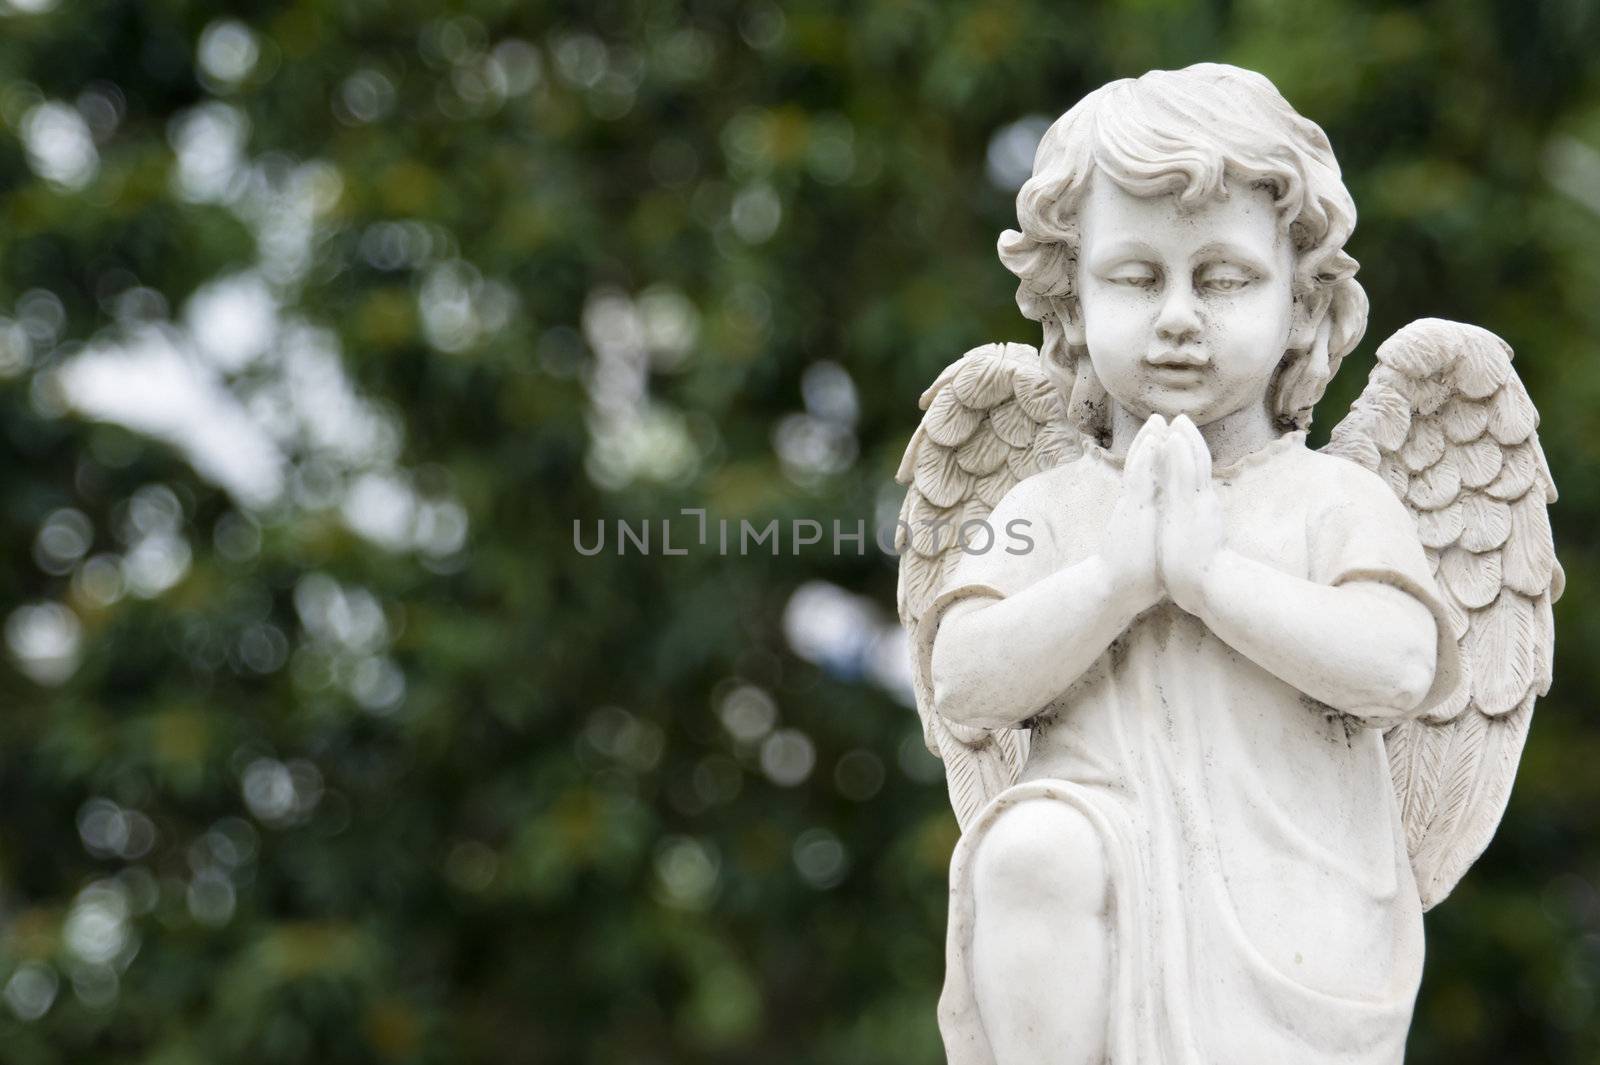 Cute winged Angel statue in praying pose with greenry background